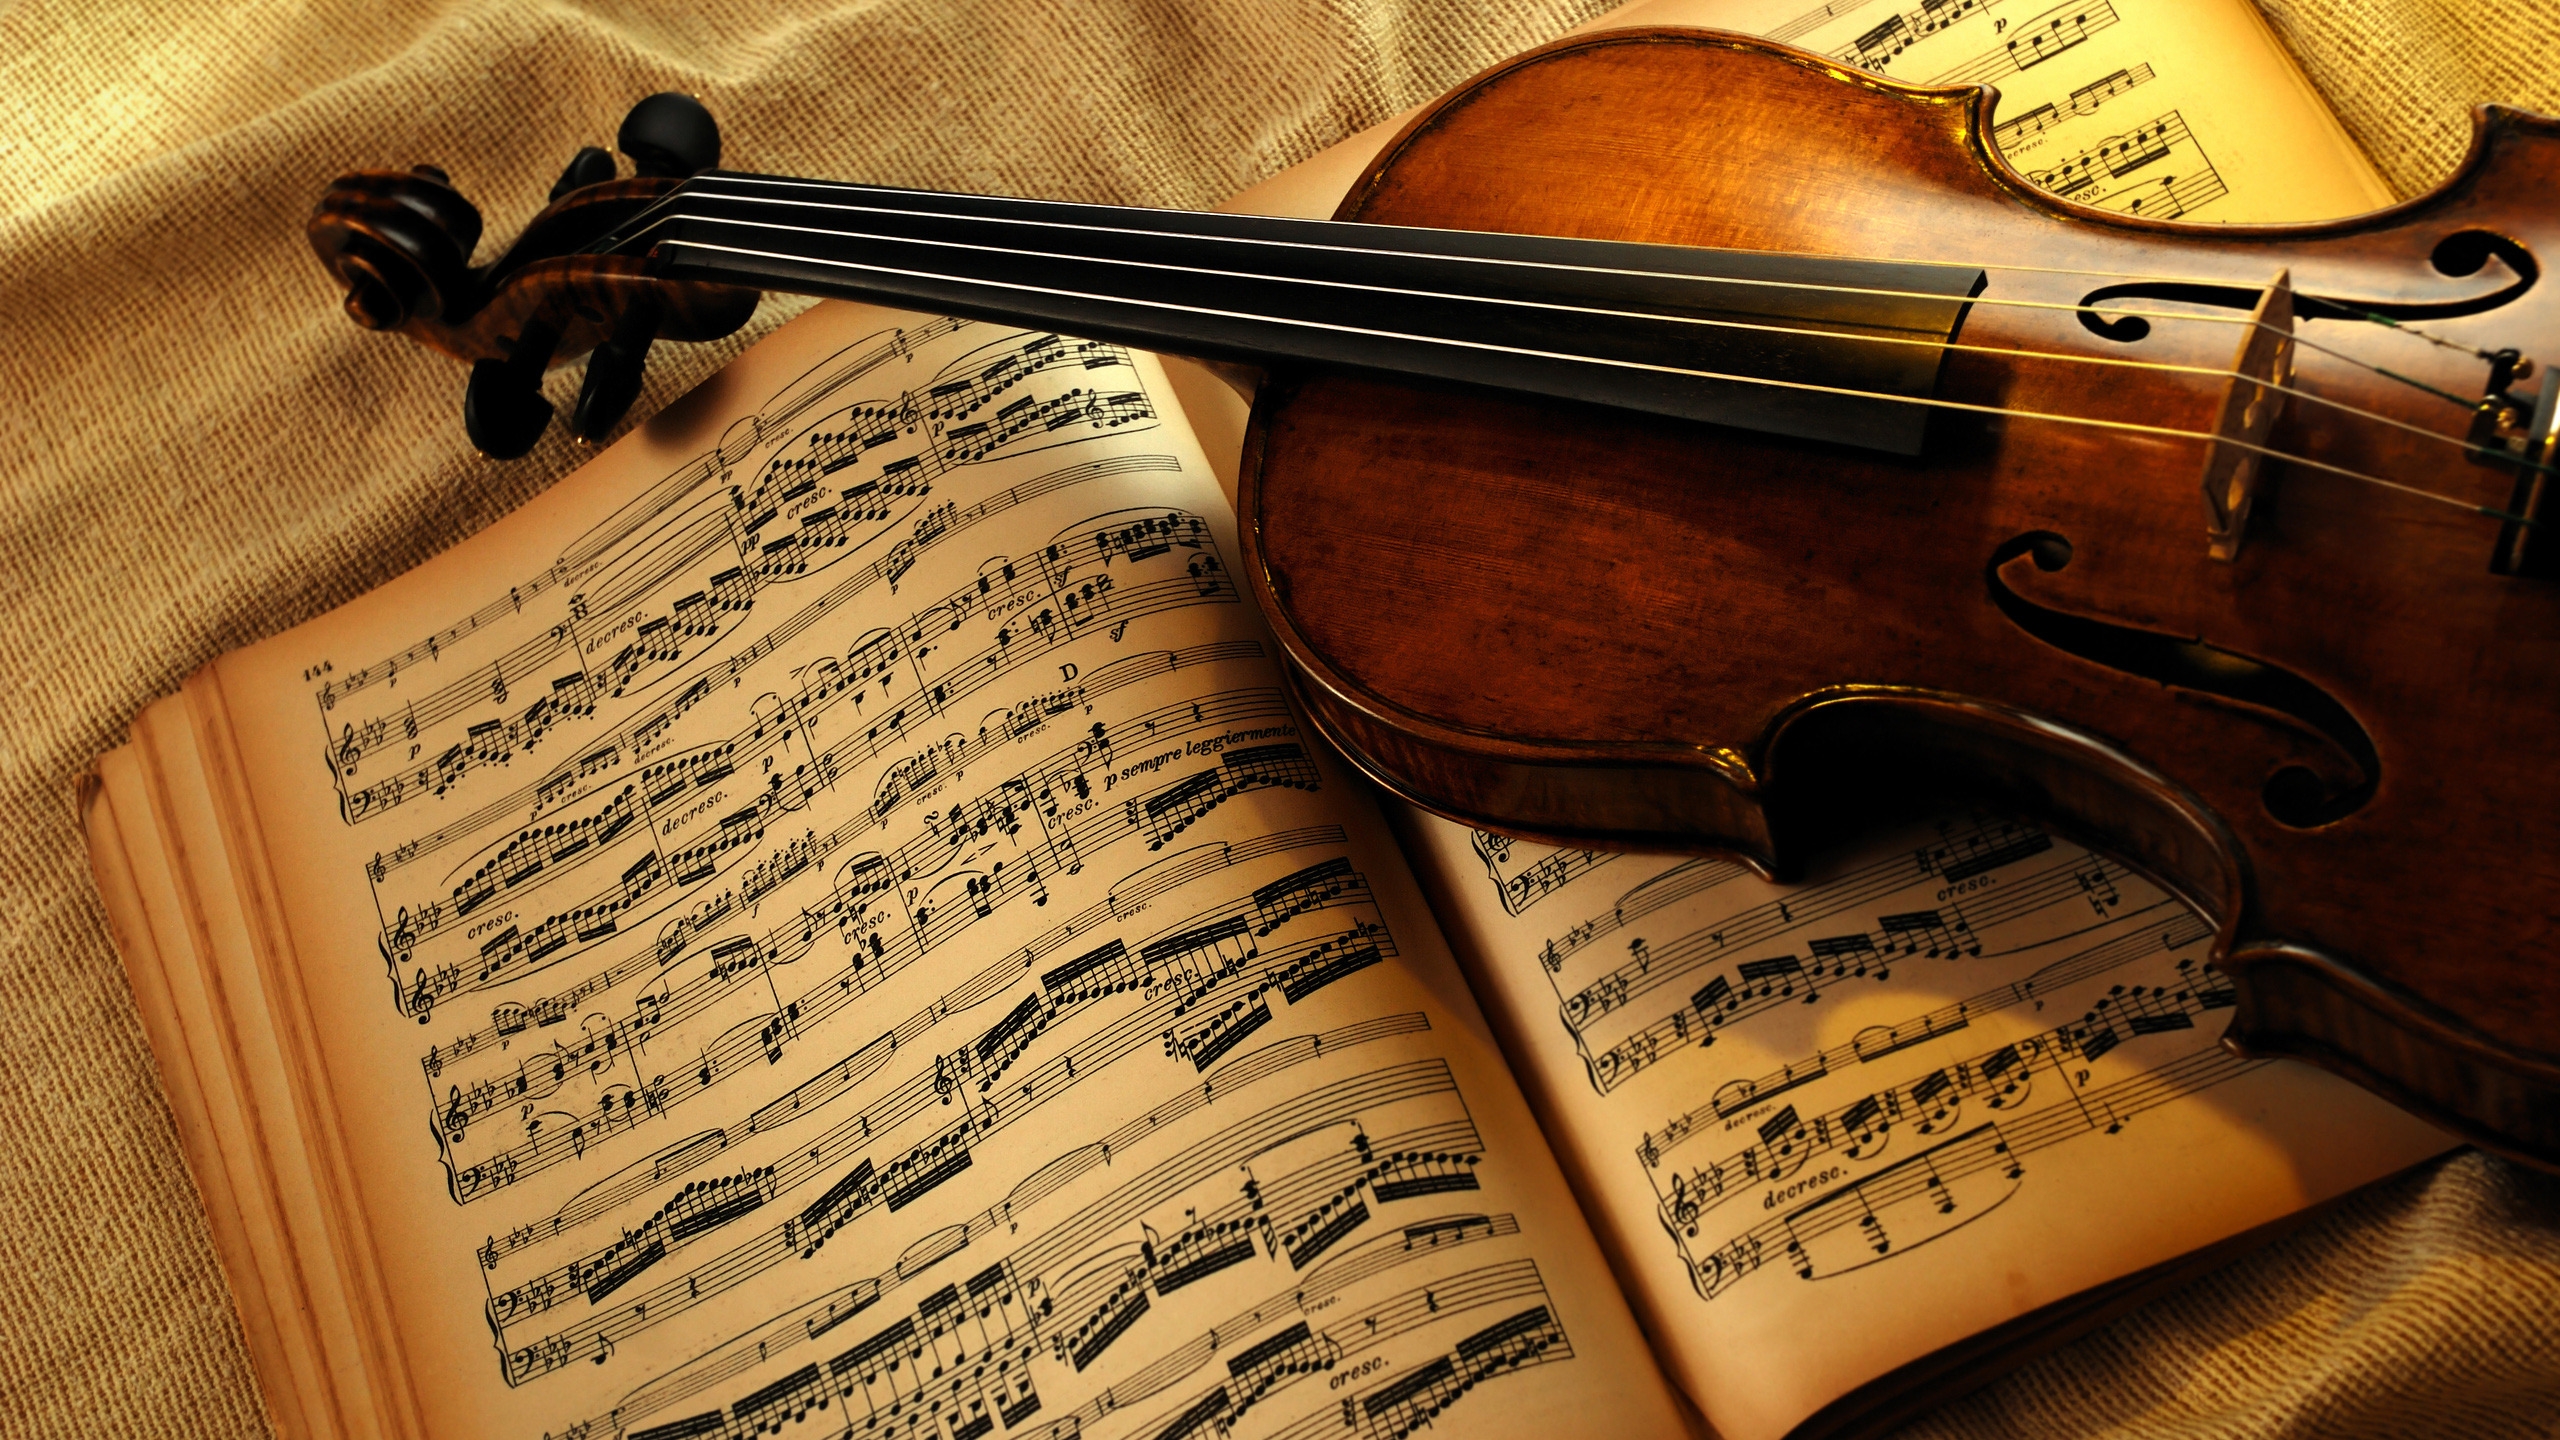 Old Violin and Book for 2560x1440 HDTV resolution